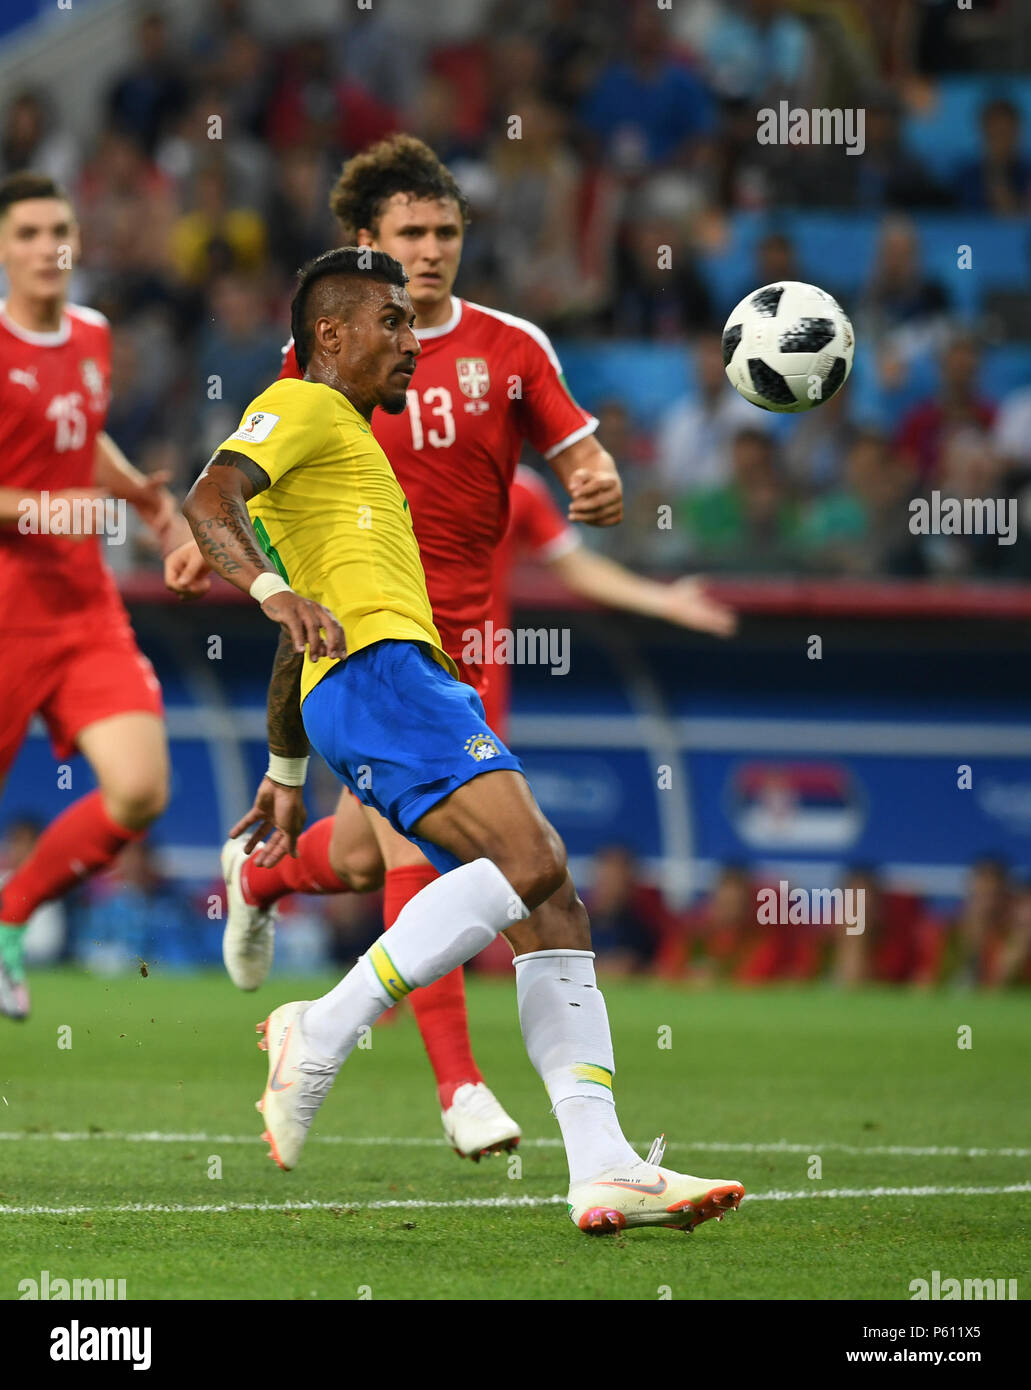 Moscow, Russia. 27th June, 2018. Paulinho (C) of Brazil shoots to score during the 2018 FIFA World Cup Group E match between Brazil and Serbia in Moscow, Russia, June 27, 2018. Credit: Du Yu/Xinhua/Alamy Live News Stock Photo